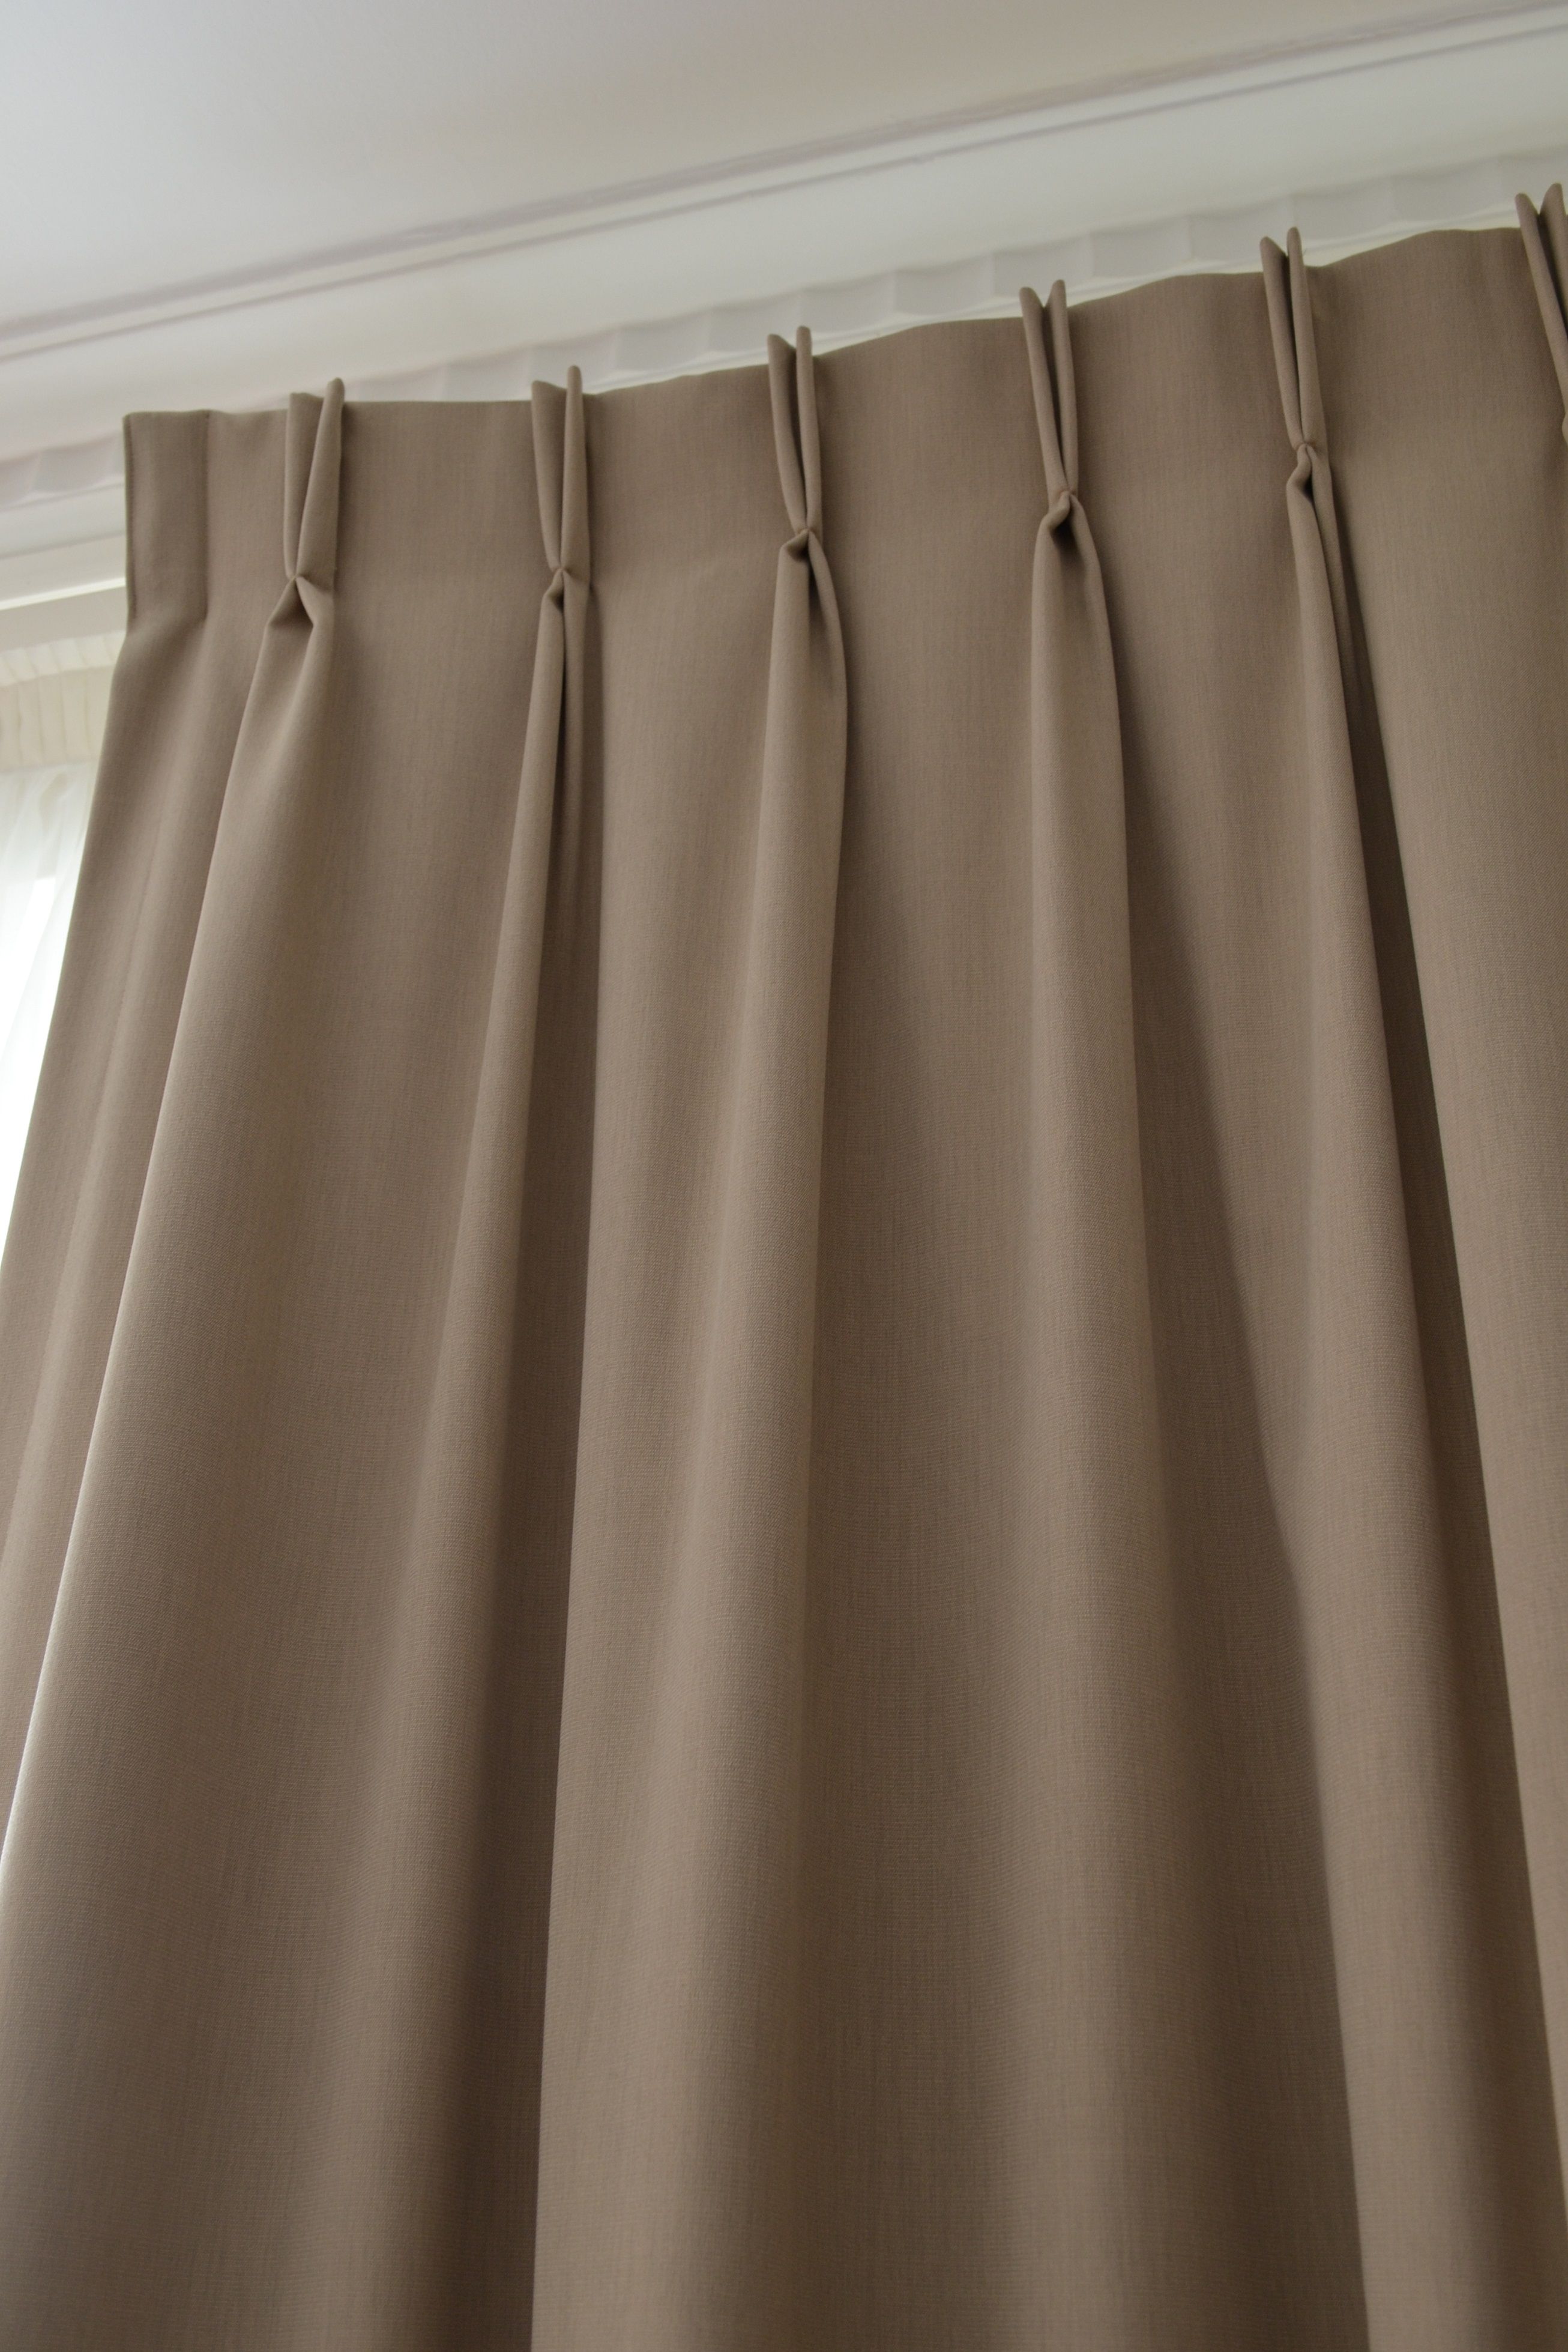 Double Pinch Pleat Curtains Curtains Pinterest Curtains With Regard To Double Pinch Pleat Curtains (Photo 4 of 15)